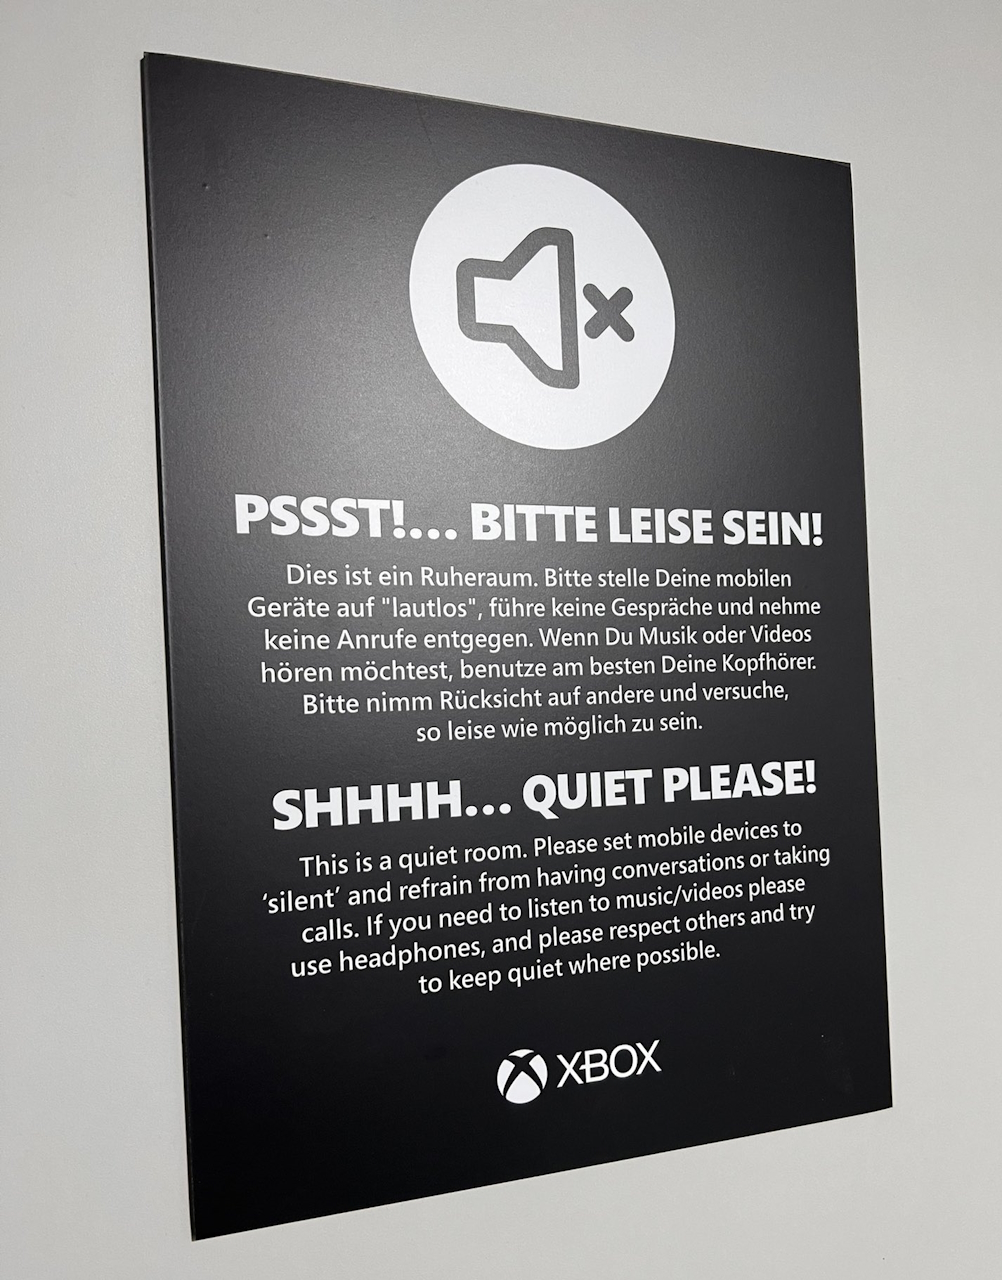 A black sign with white text which reads in English and German, "Shhhh... Quiet Please! This is a quiet room. Please set mobile devices to silent and refrain from having conversations or taking calls. If you need to listen to music/videos please use headphones, and please respect others and try to keep quiet where possible."